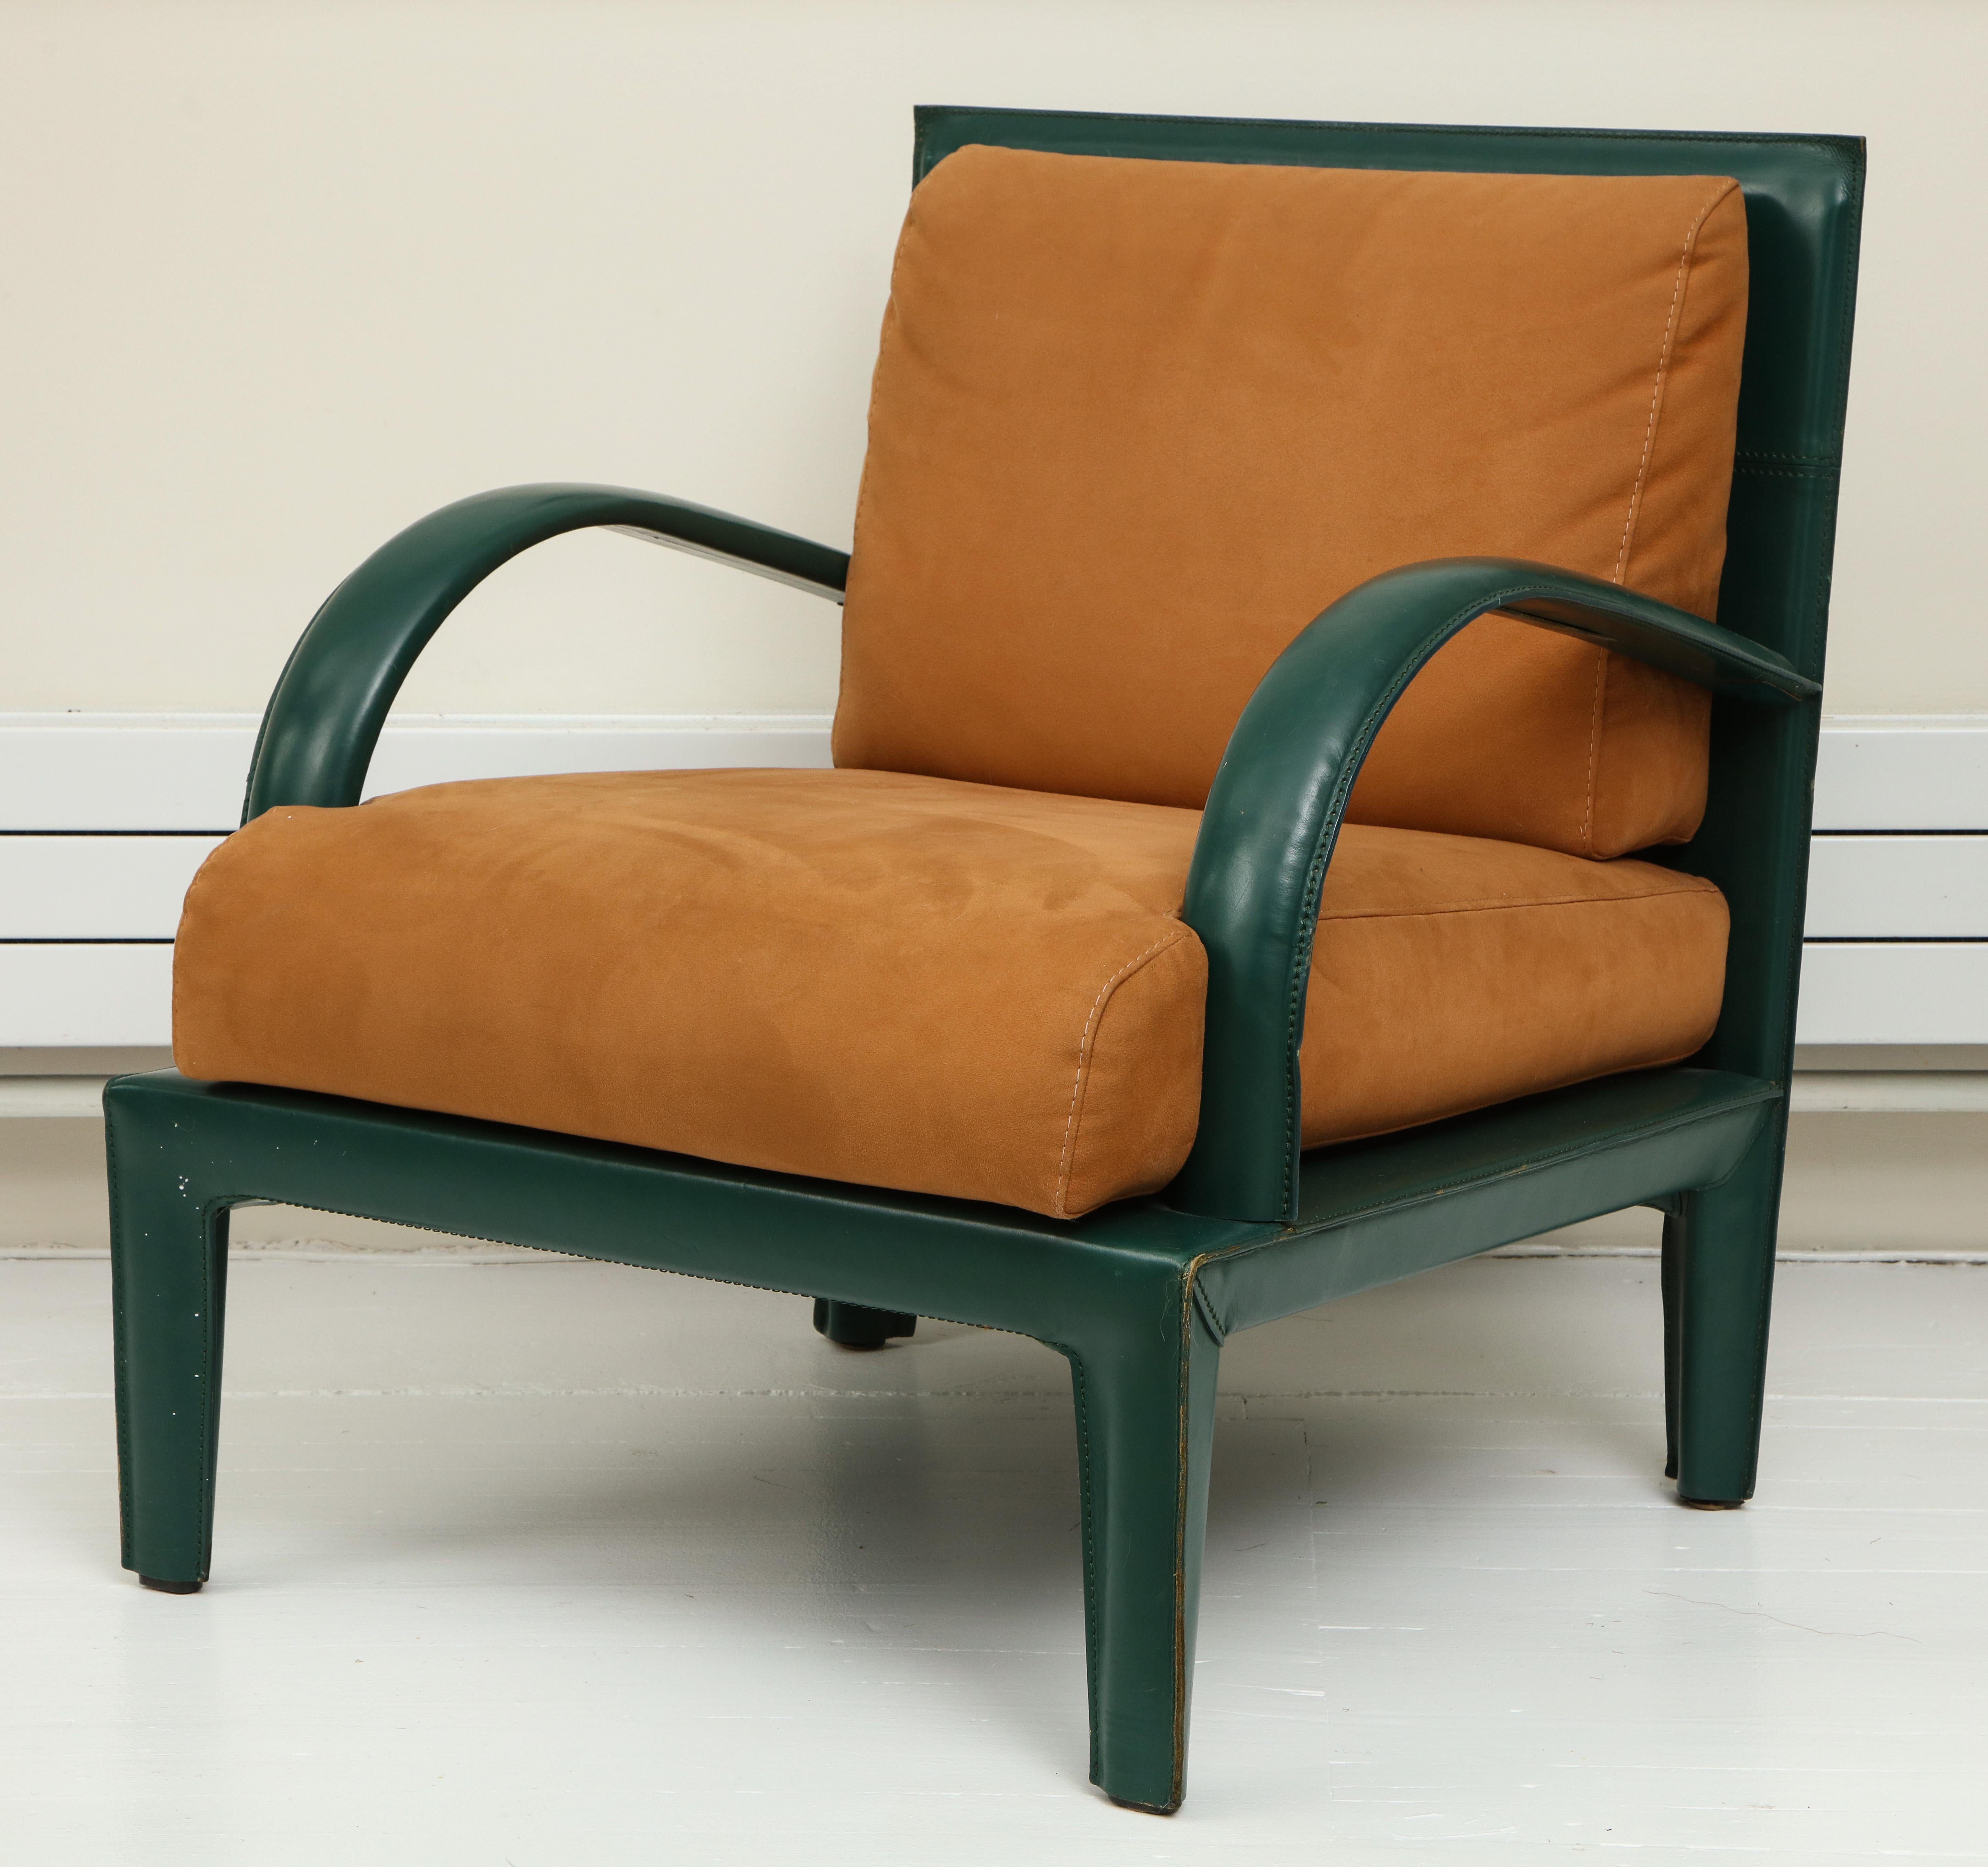 French Hermes Inspired Saddle Stitched Brown Green Leather Lounge Chairs, 1980s, France For Sale